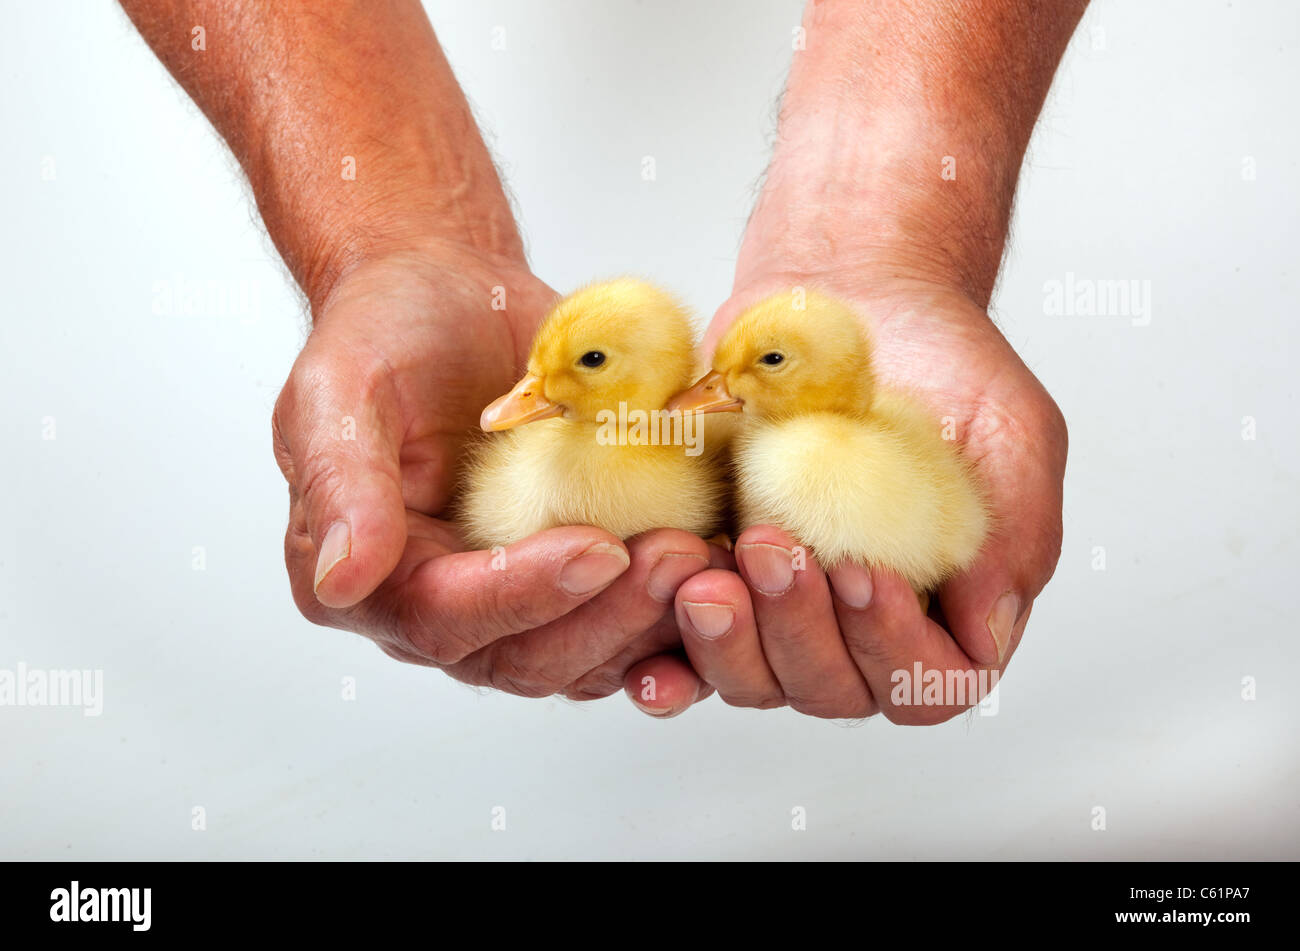 Newly hatched Ducklings on white background Stock Photo